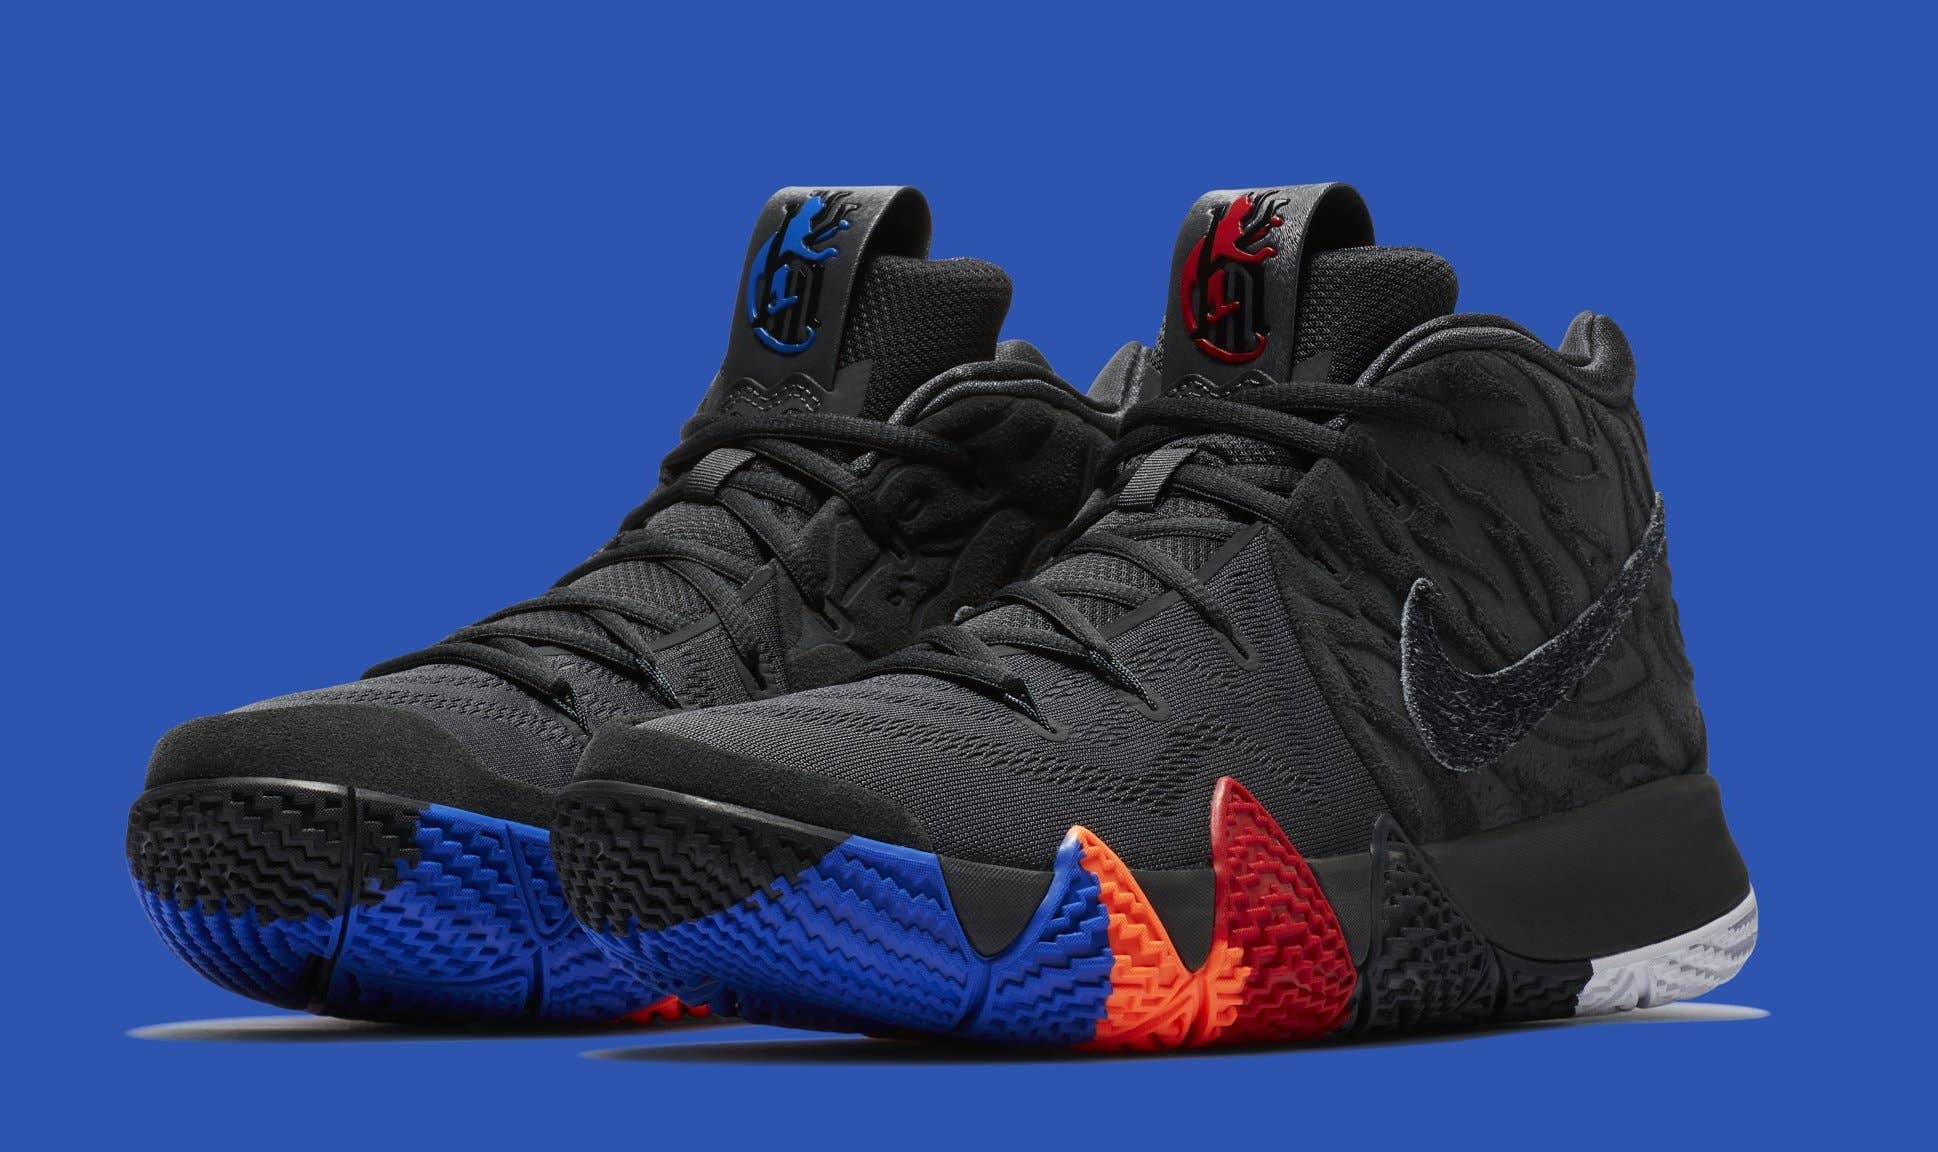 Nike Kyrie 4 'Year of the Monkey' 943807 011 (Pair)